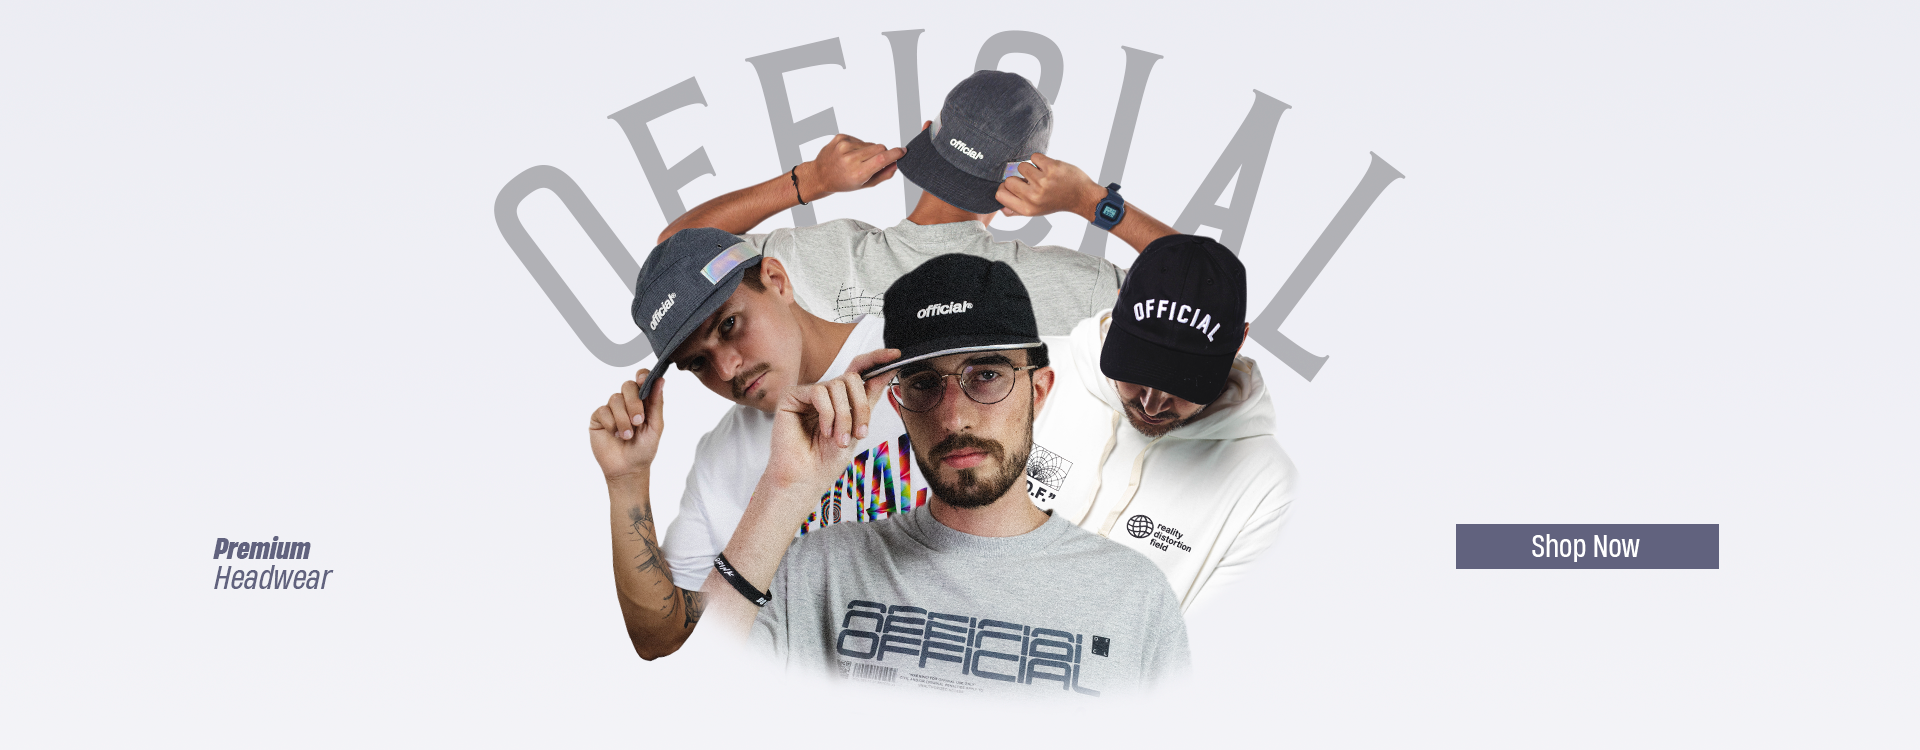 Stay Official – The Official Brand